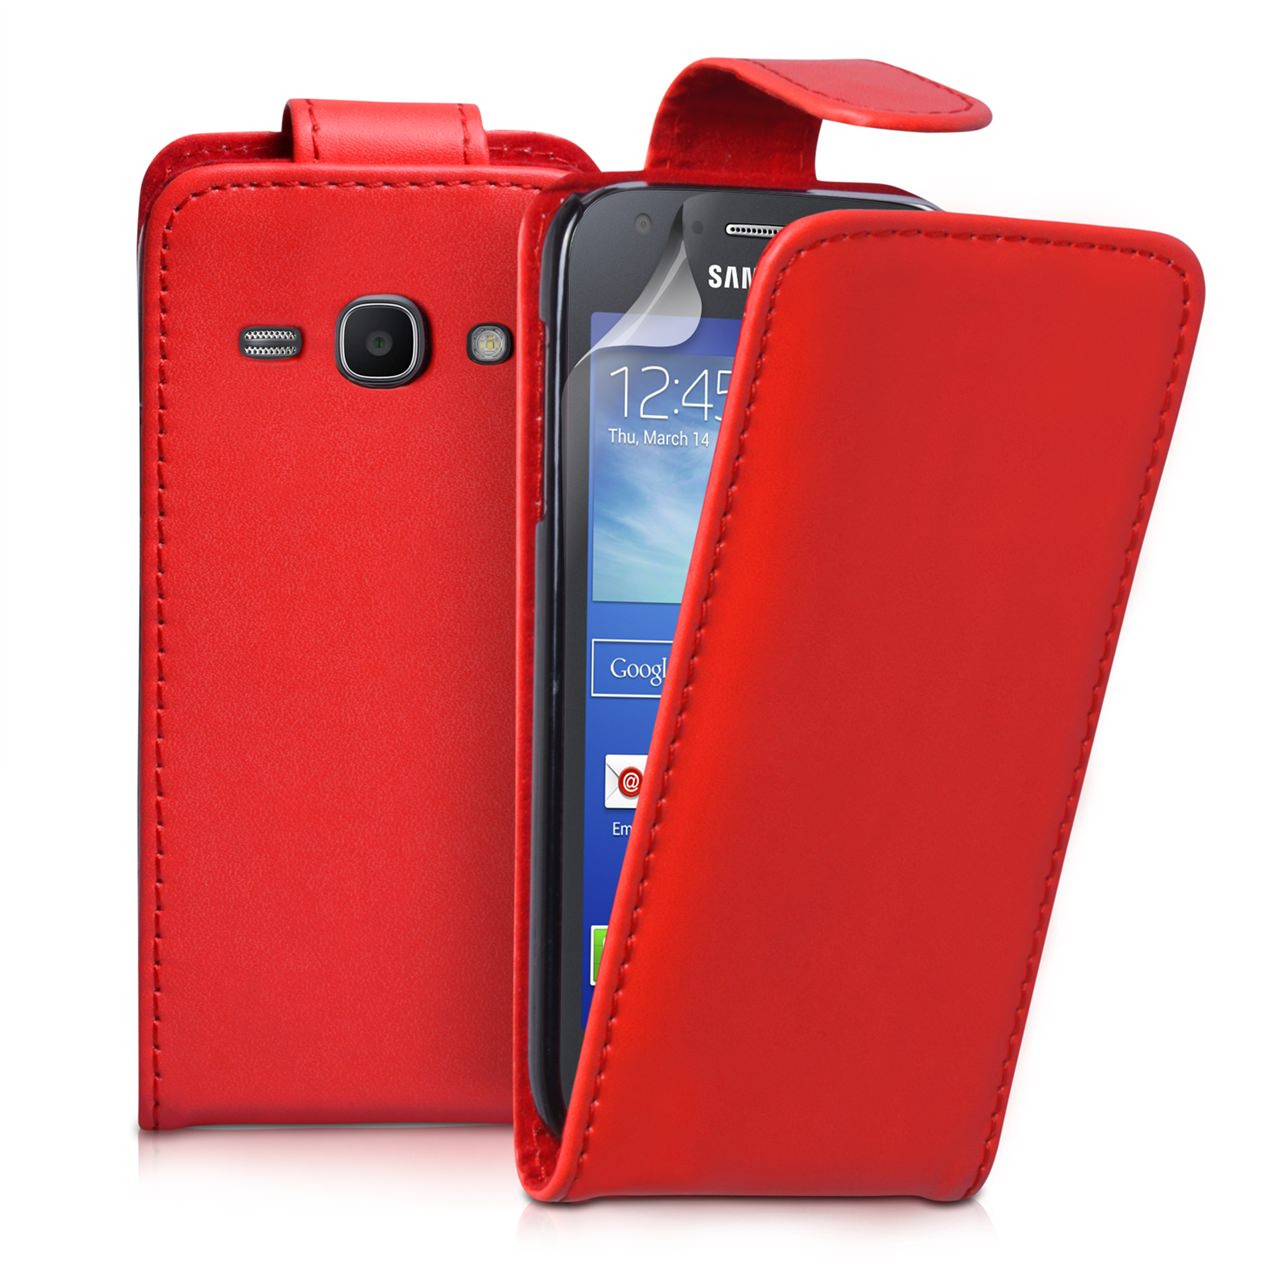 YouSave Samsung Galaxy Ace 3 Leather-Effect Flip Case - Red